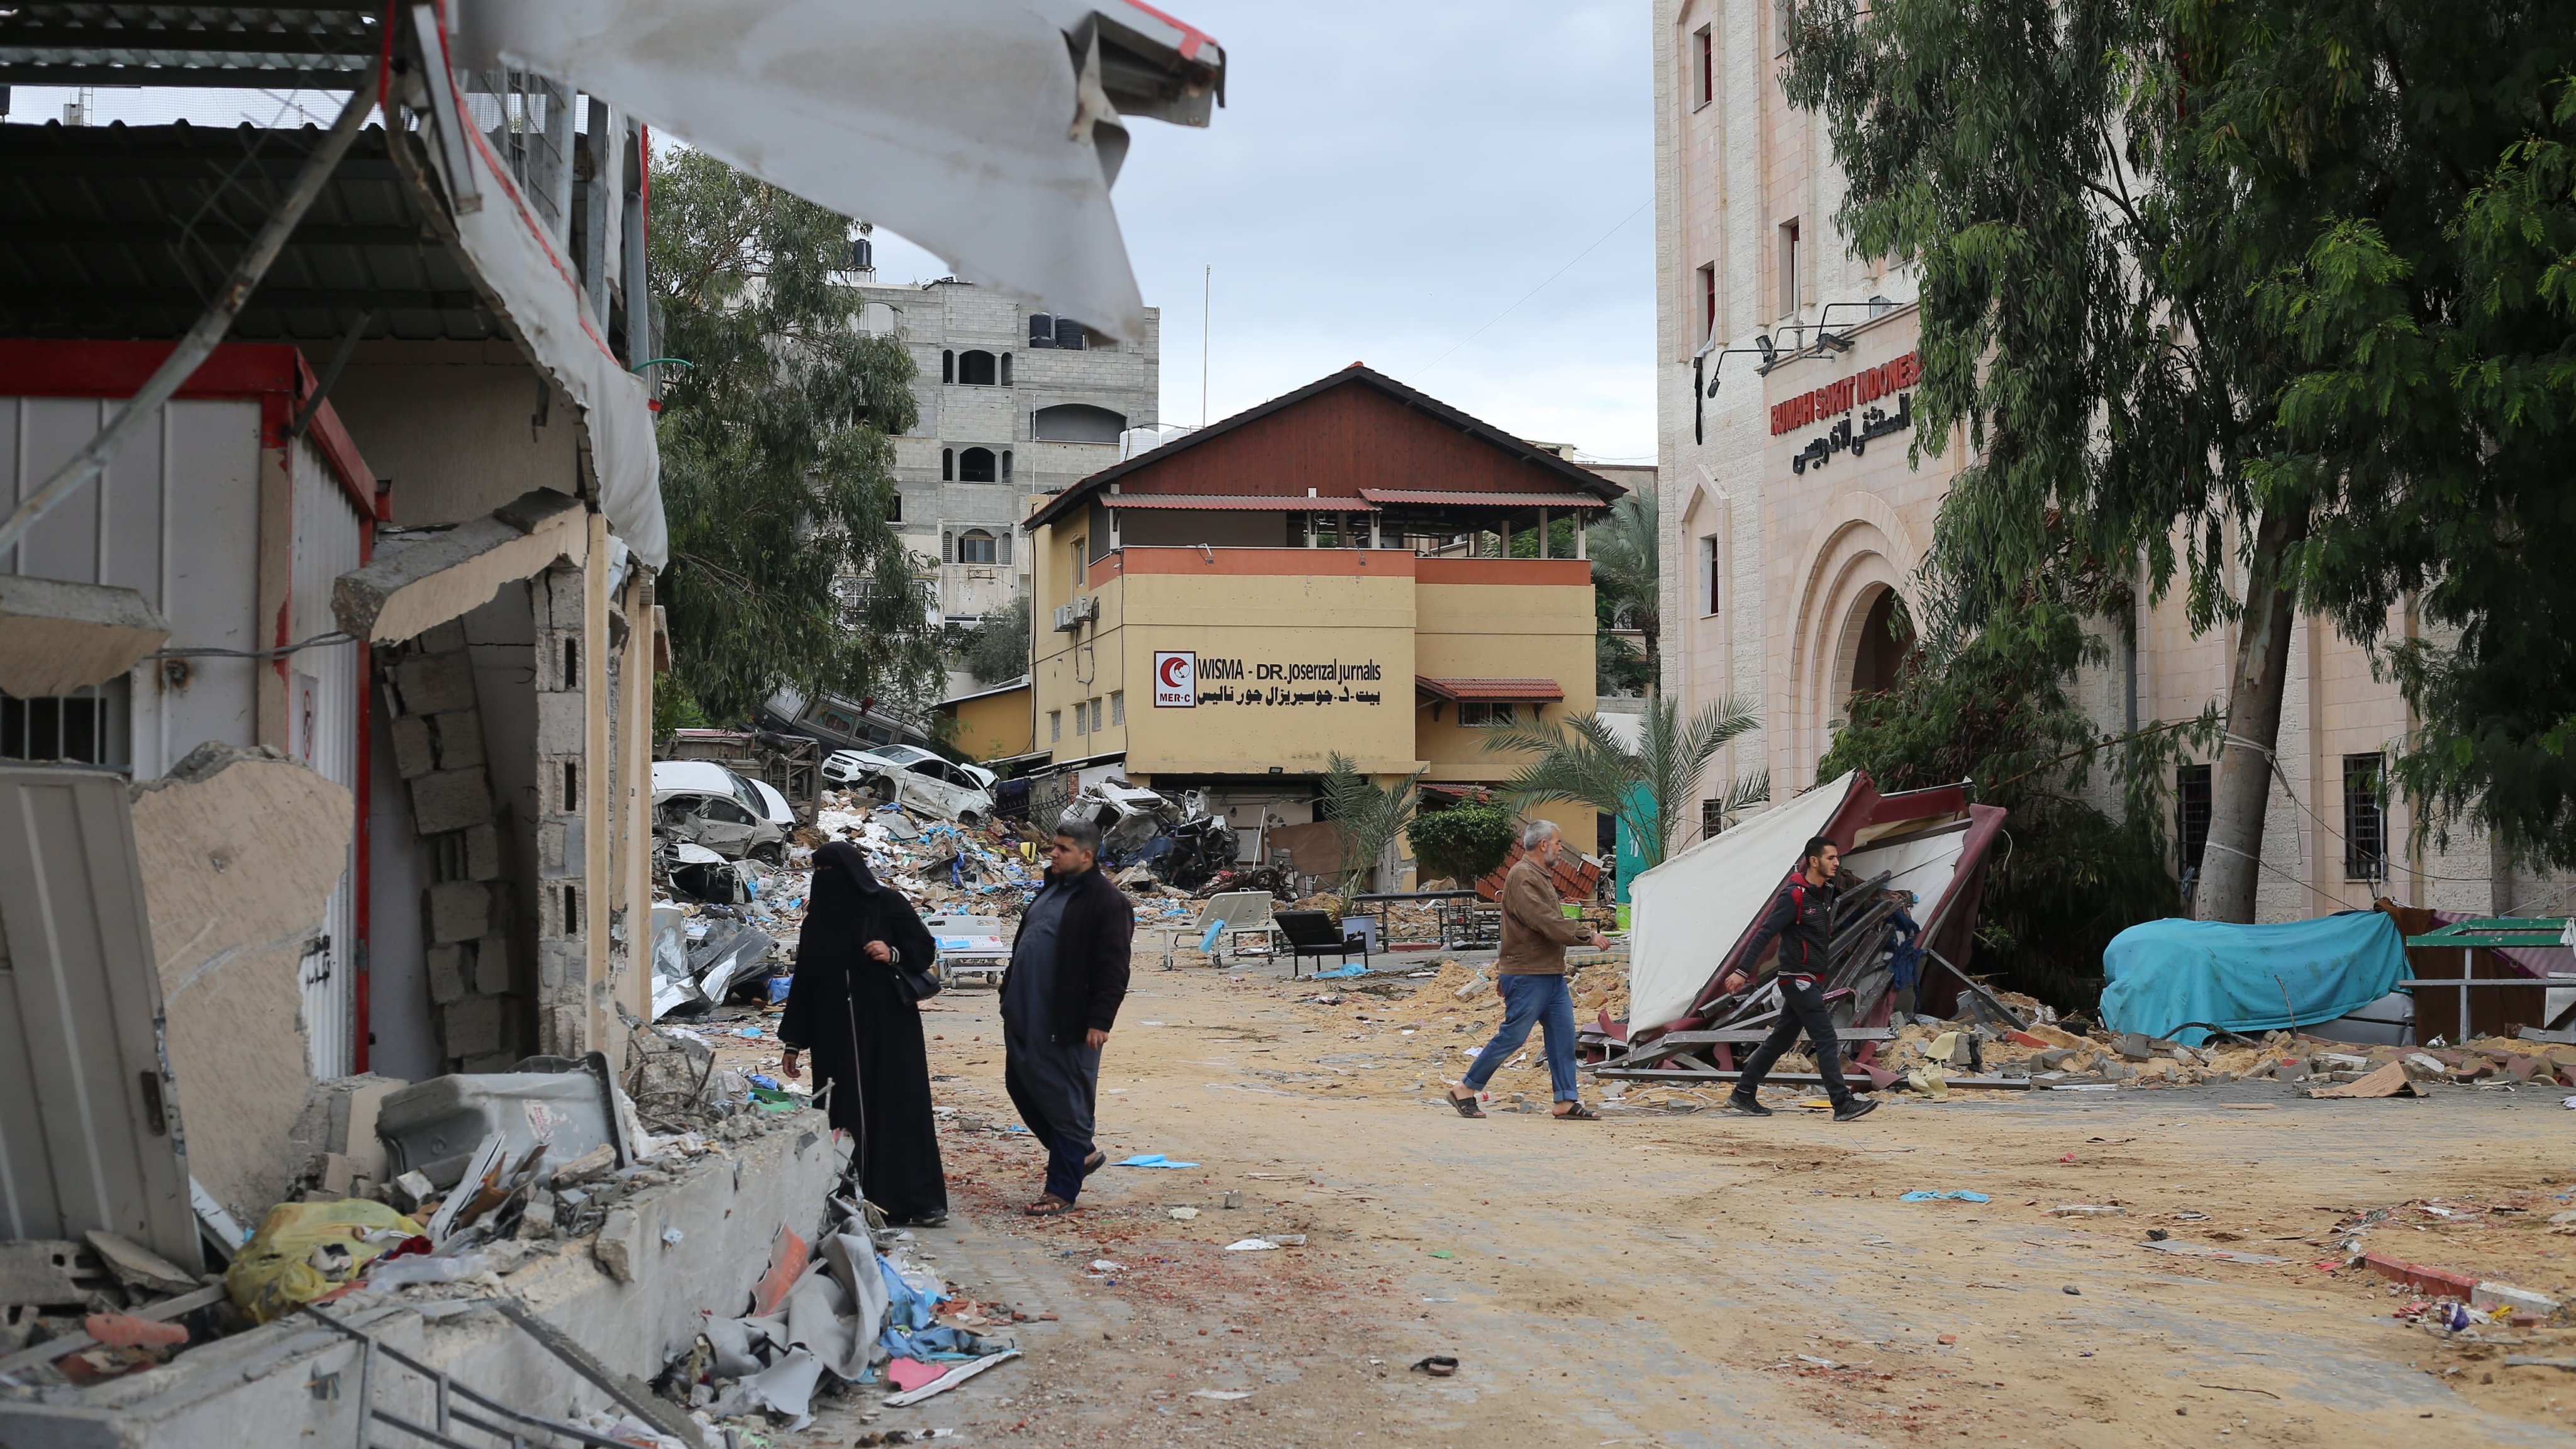 People walk amid rubble near the destroyed Indonesian hospital in Beit Lahia, north of the Gaza Strip, in Palestine on November 29. Healthcare facilities and workers have come under attack in recent conflicts despite international laws meant to ensure their safety. Photo: dpa